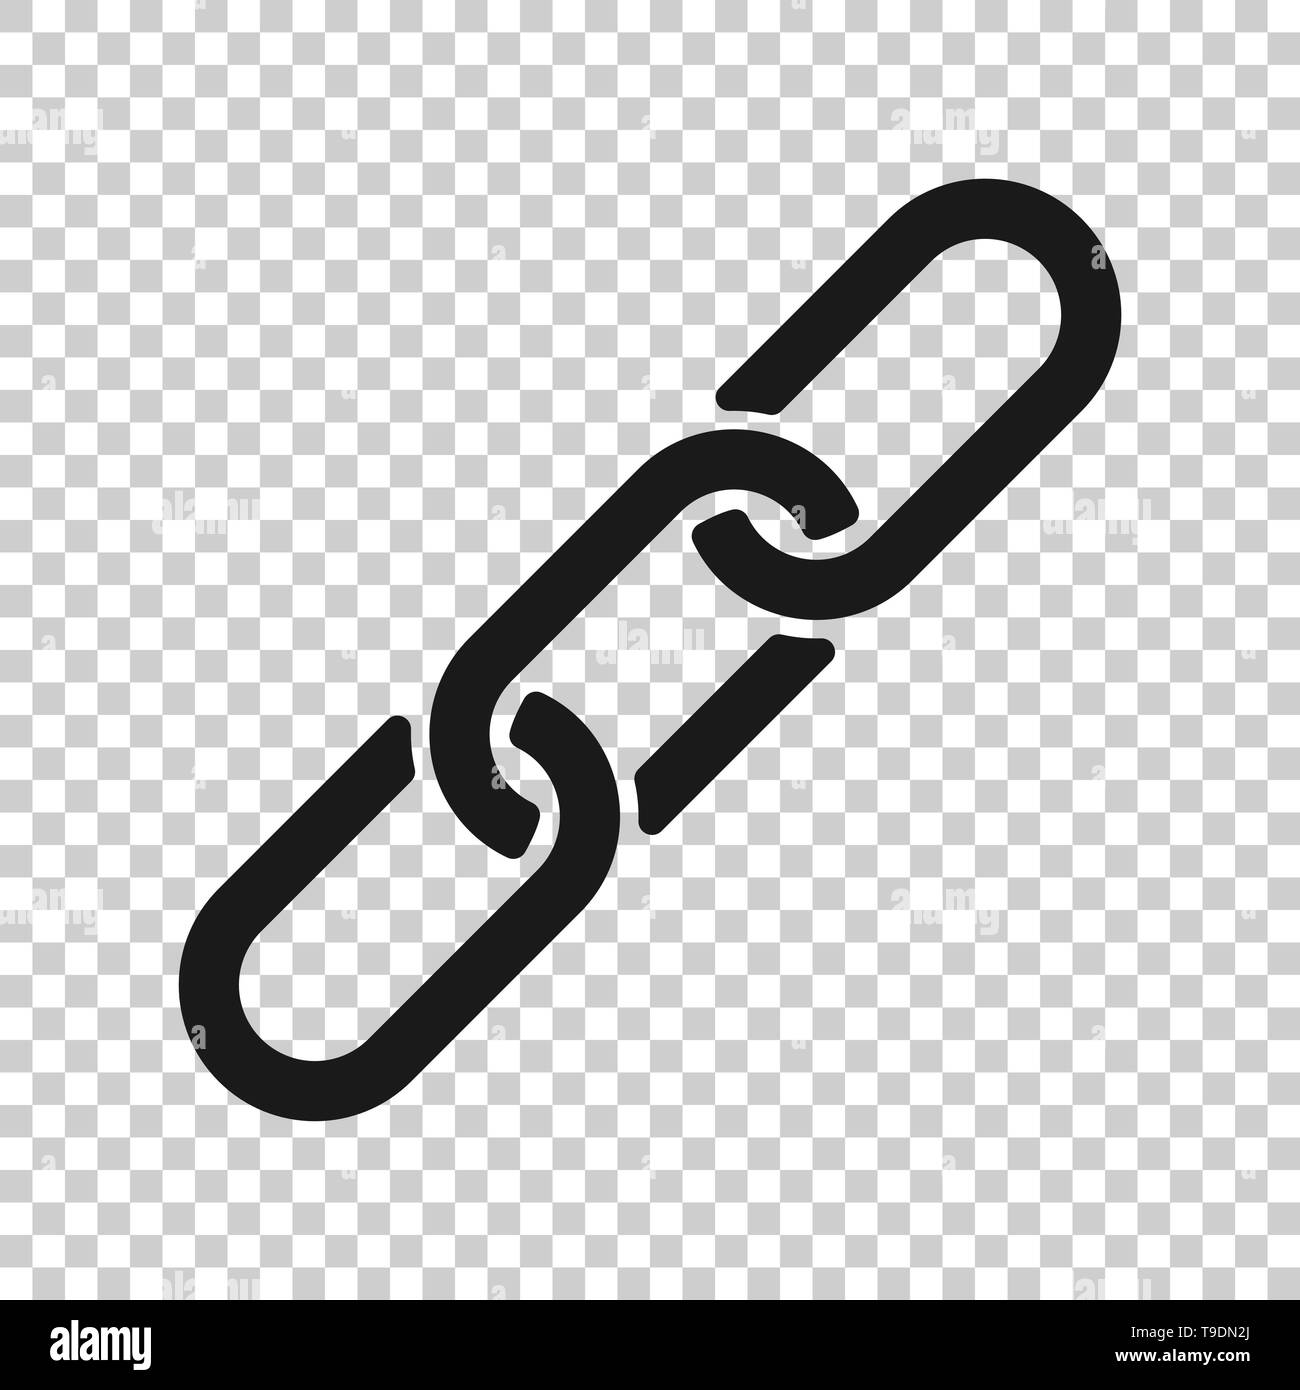 Chain sign icon in transparent style. Link vector illustration on isolated background. Hyperlink business concept. Stock Vector